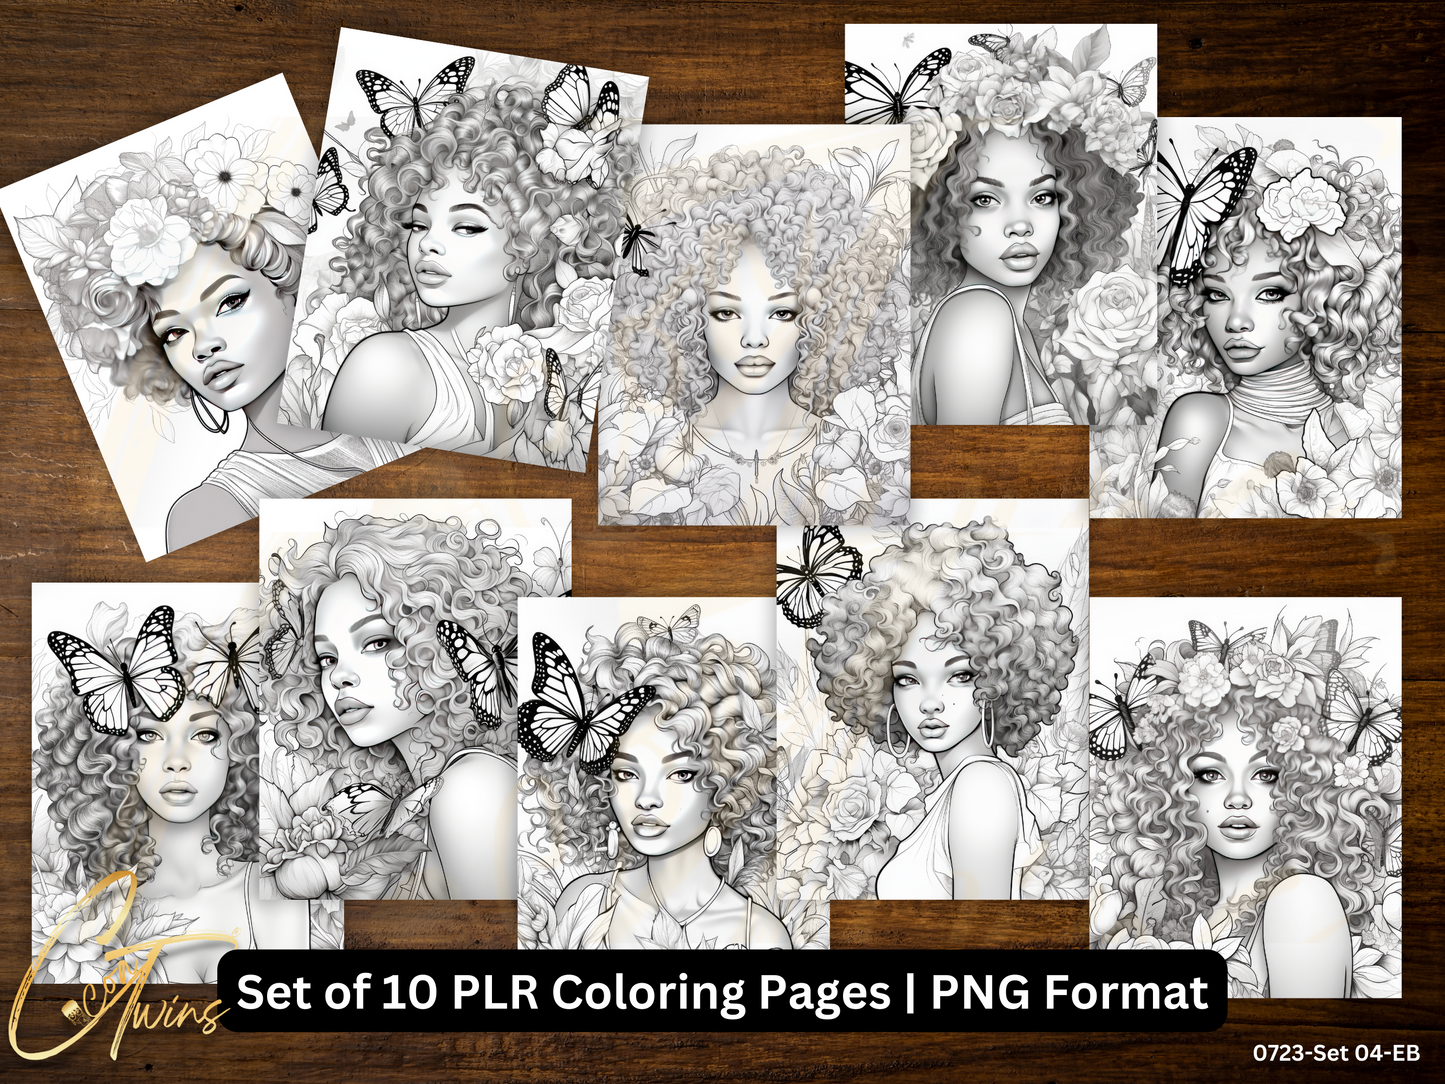 Limited Edition | PLR Coloring Pages | Set 04-EB (0723)